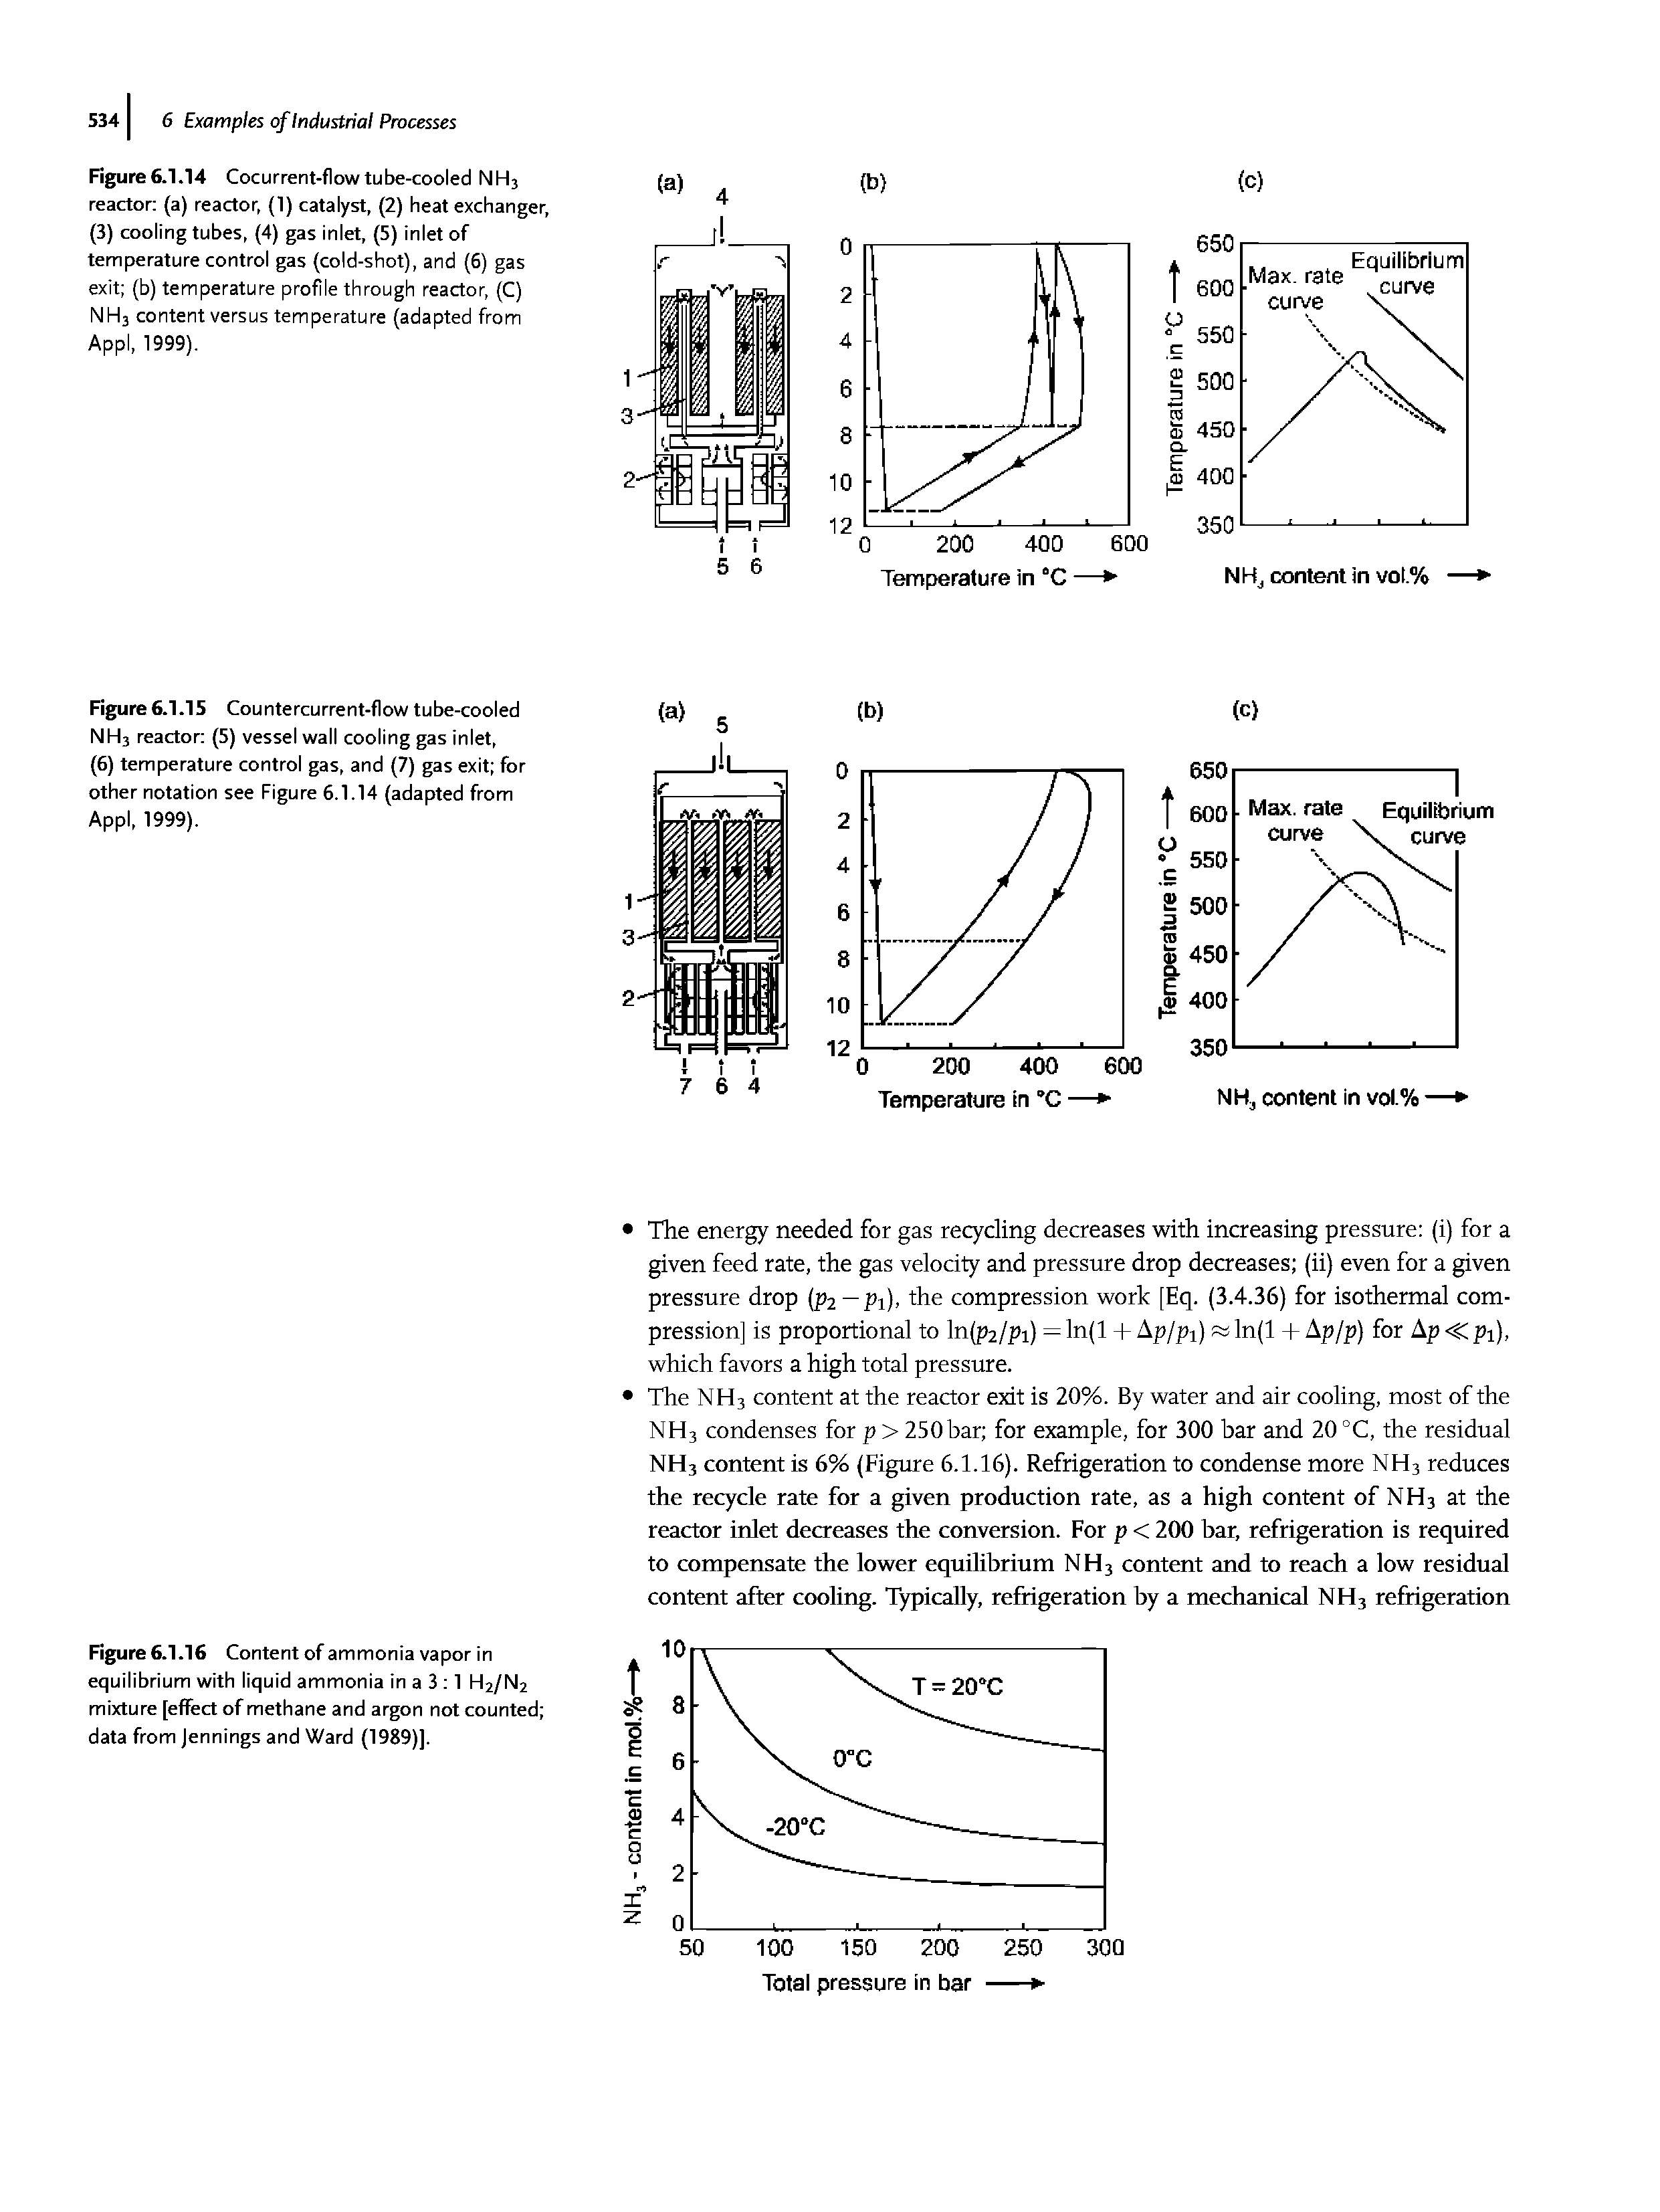 Figure 6.1.16 Content of ammonia vapor in equilibrium with liquid ammonia in a 3 1 H2/N2 mixture [effect of methane and argon not counted data from Jennings and Ward (1989)].